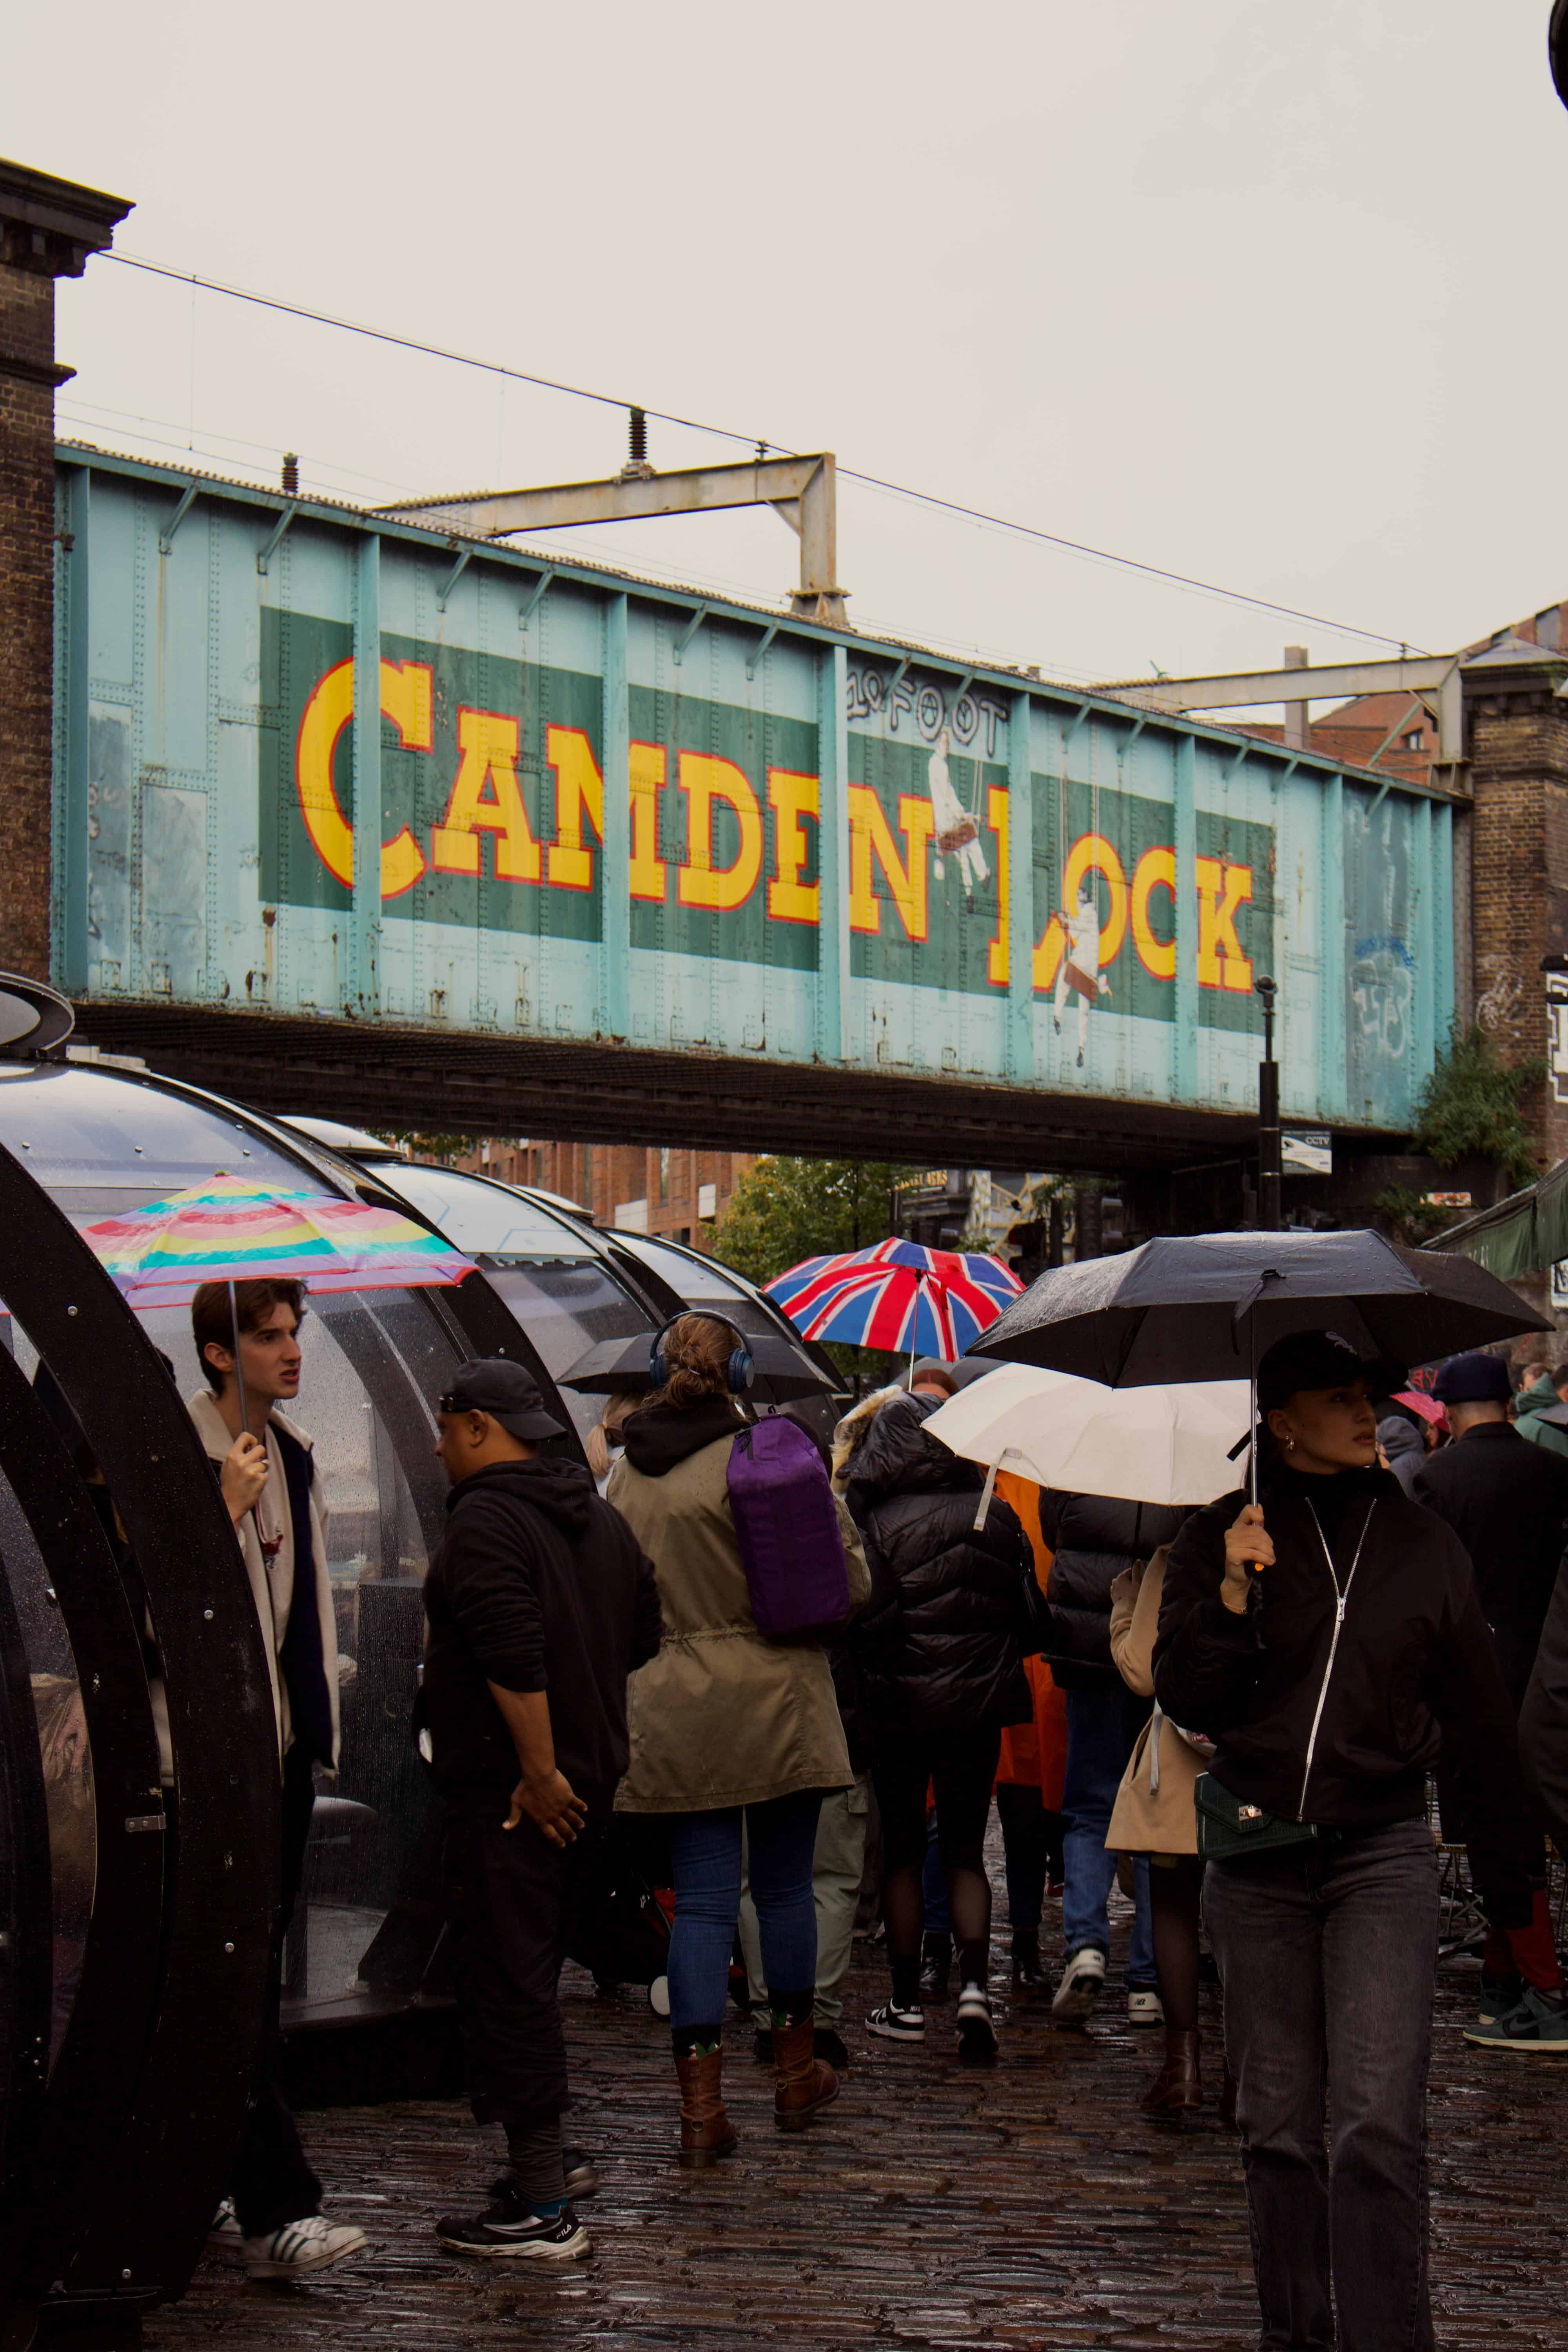 London Camden Lock Rock Festival on a raining day. best places to live in London in your 20s for music.